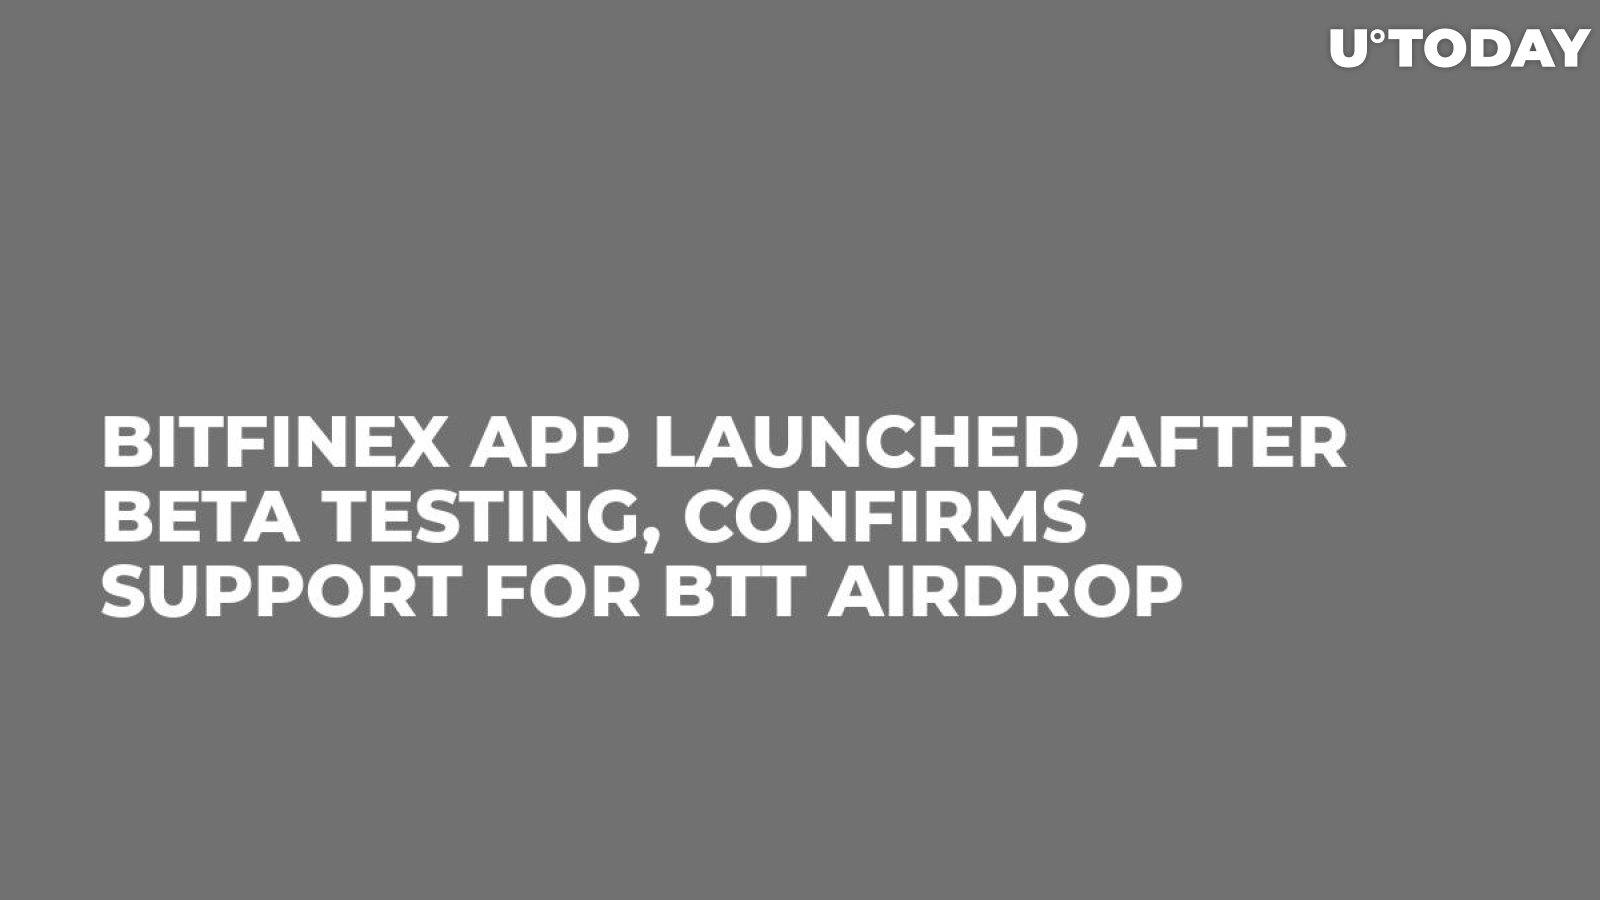 Bitfinex App Launched After Beta Testing, Confirms Support for BTT Airdrop